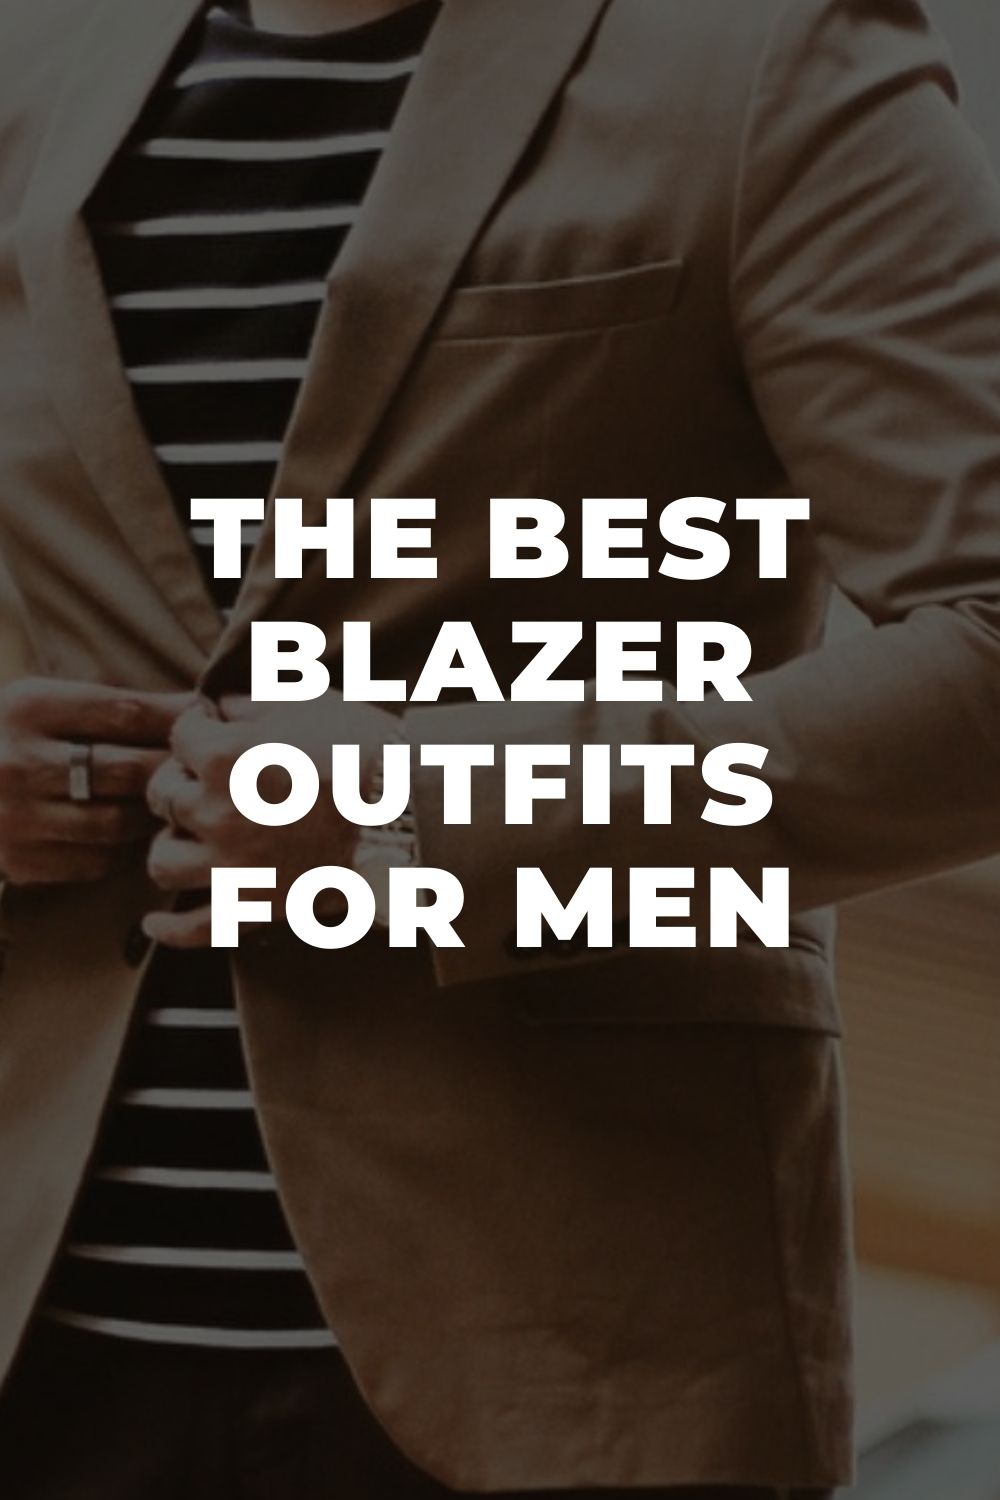 The Best Blazer Outfits For Men